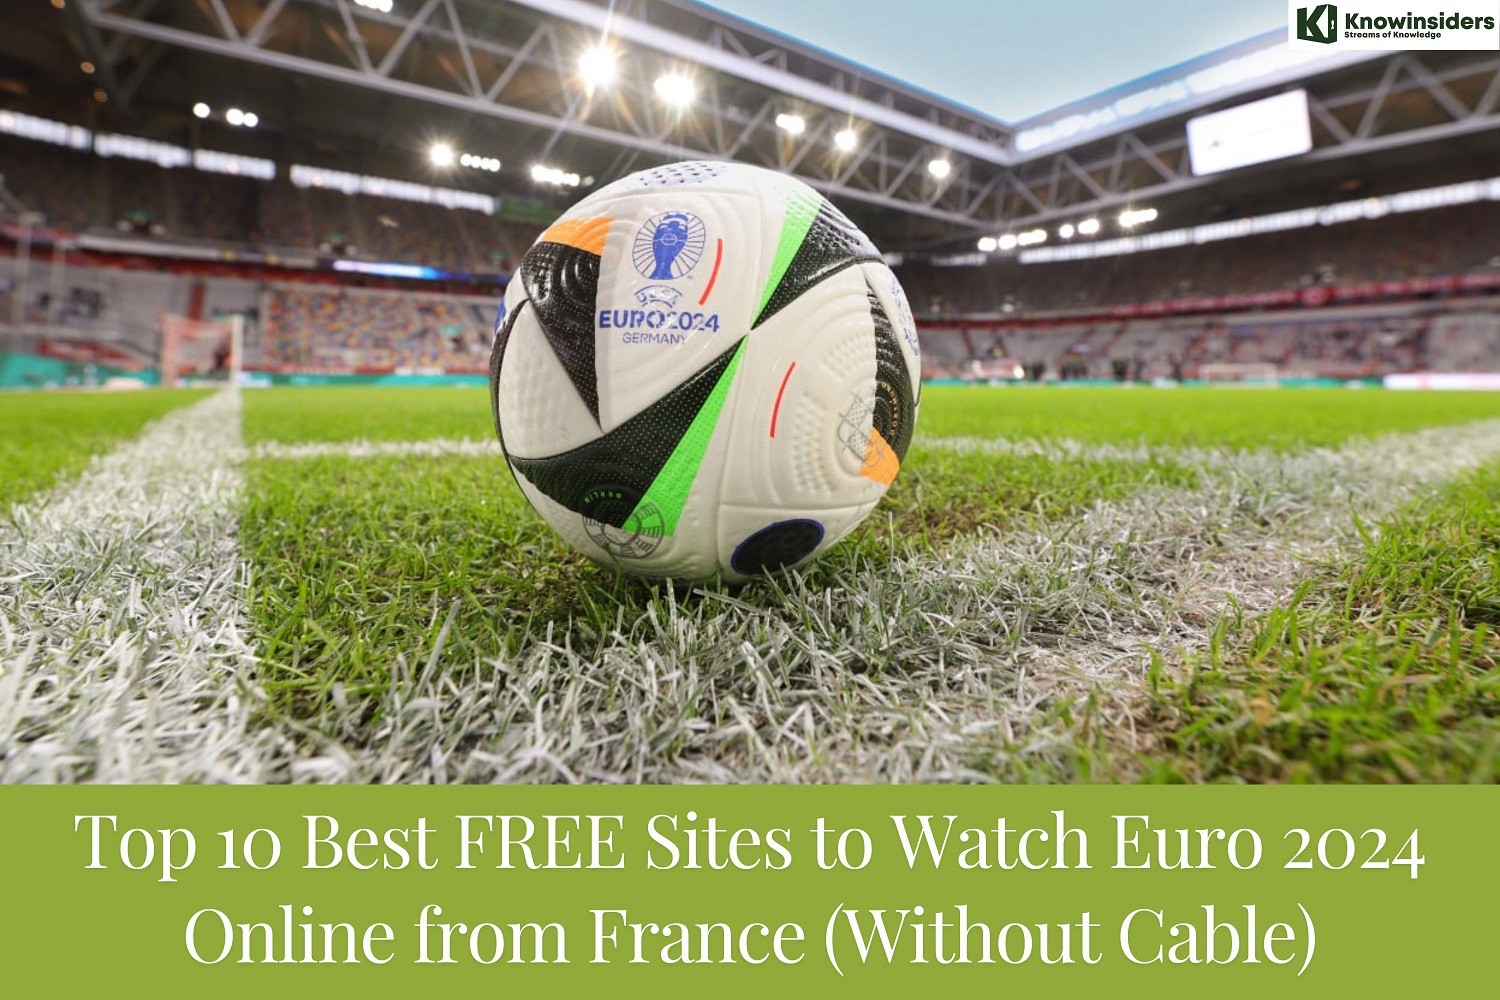 Top 10 FREE Sites to Watch Euro 2024 Online from France (Without Cable)